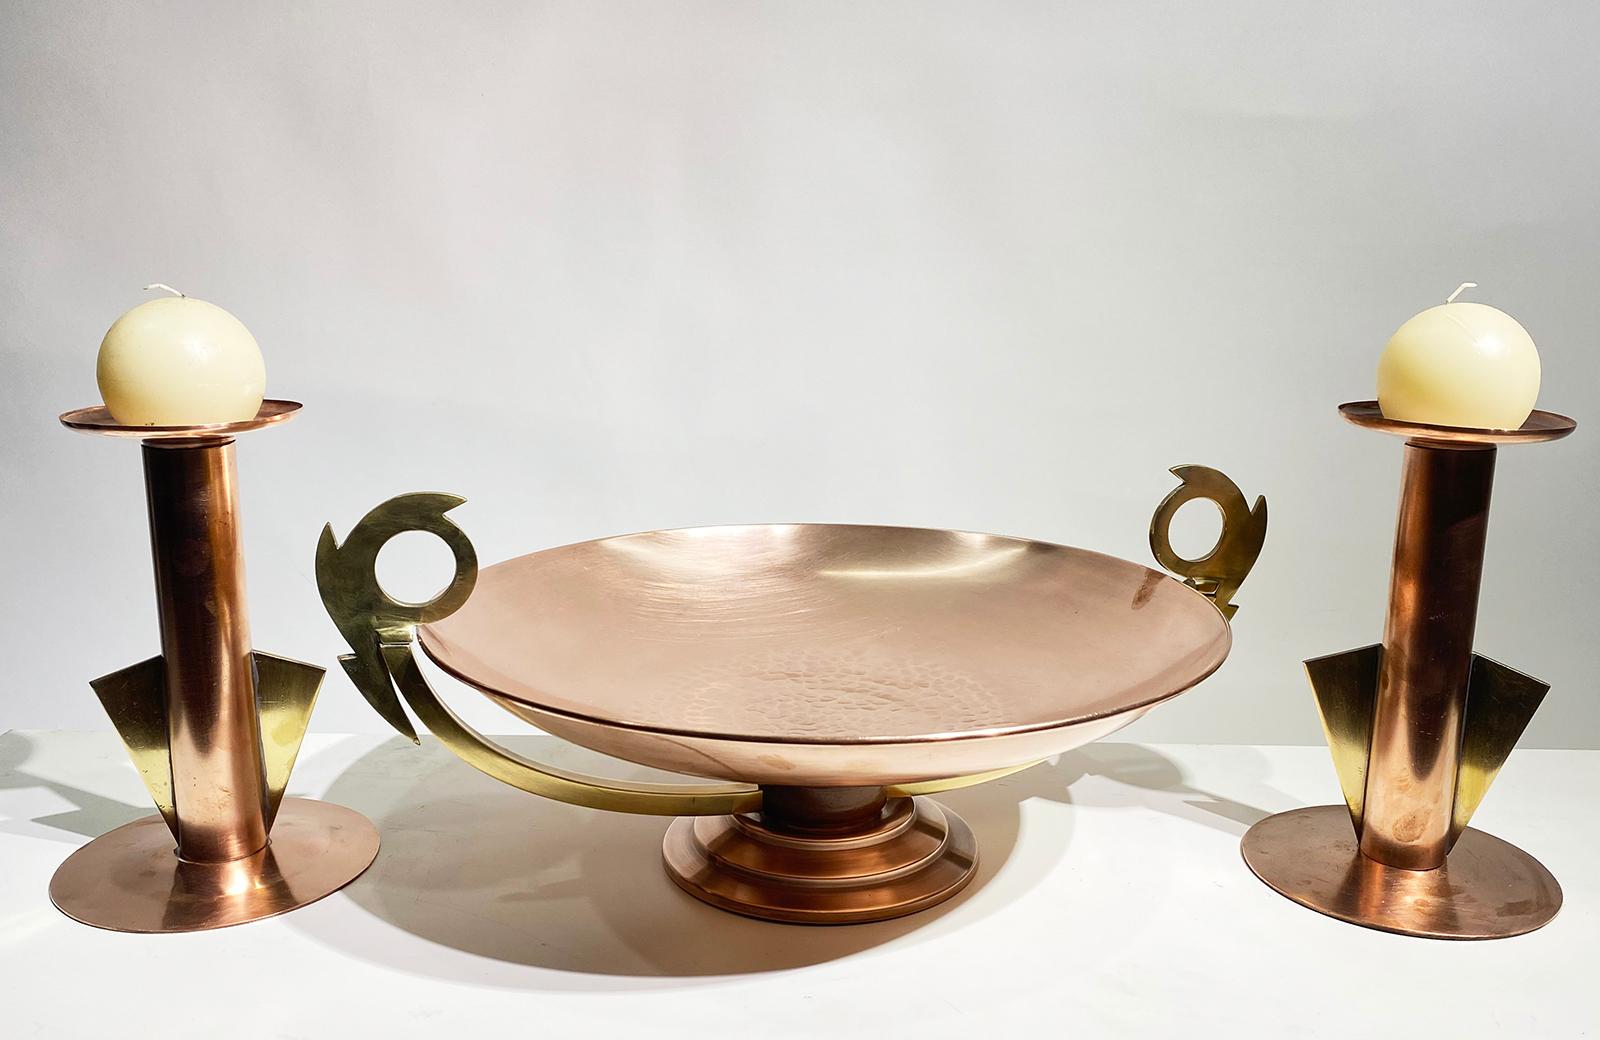 This beautiful late 19th century brass set features a hand-hammered tray with two candle holders
The tray is stamped on the bottom and marked Villedieu, short for Villedieu-les-Poeles, a town in Normandy considered the copper capital of France. c.